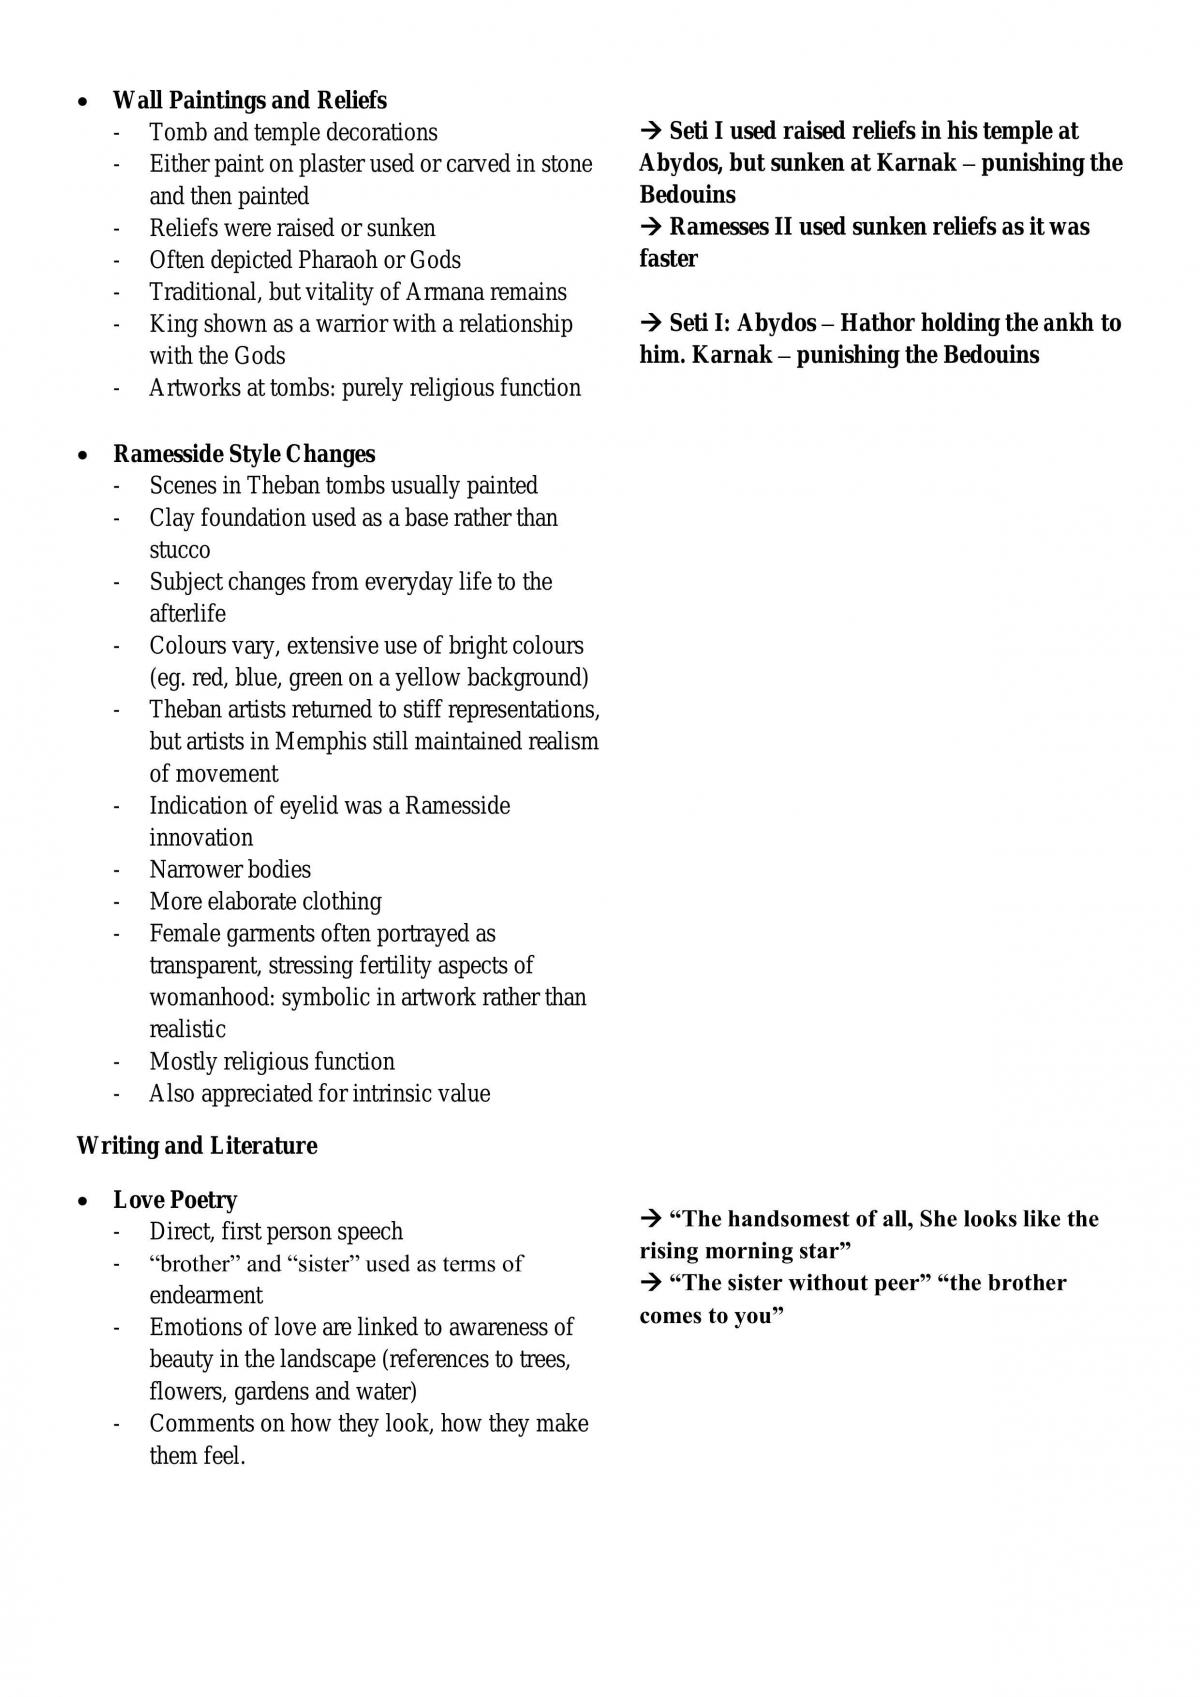 HSC Ancient History Notes New Kingdom Egypt - Page 18